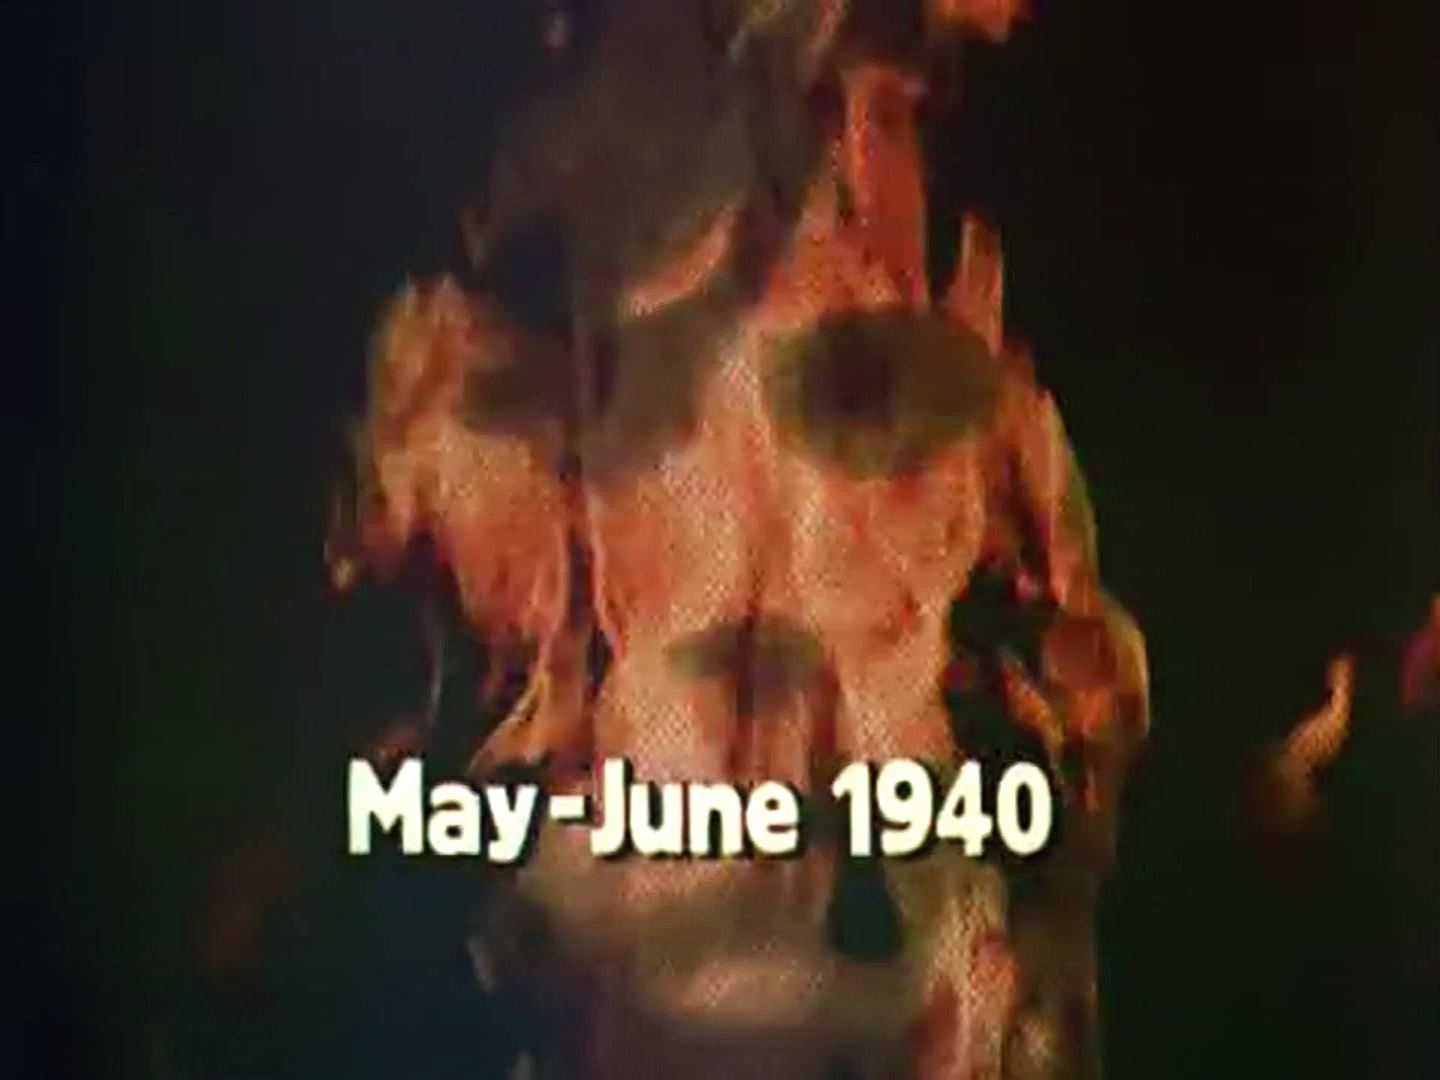 Main title from the 1973 ‘France Falls’ episode of The World at War (1973-74) (2). May-June 1940